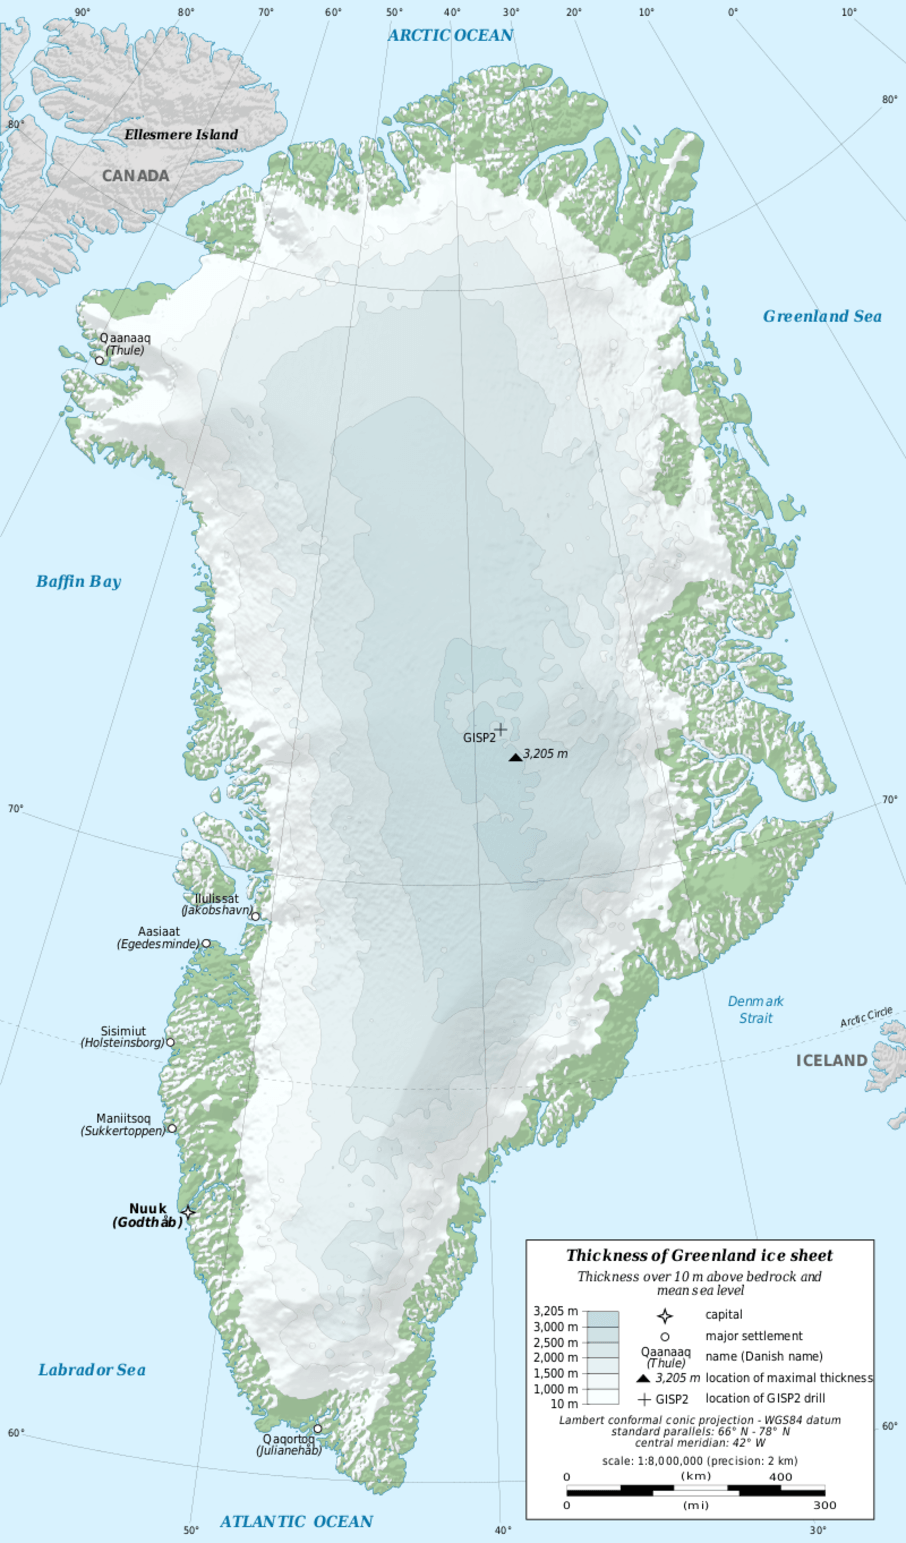 Most of Greenland is covered by more than a kilometre of ice